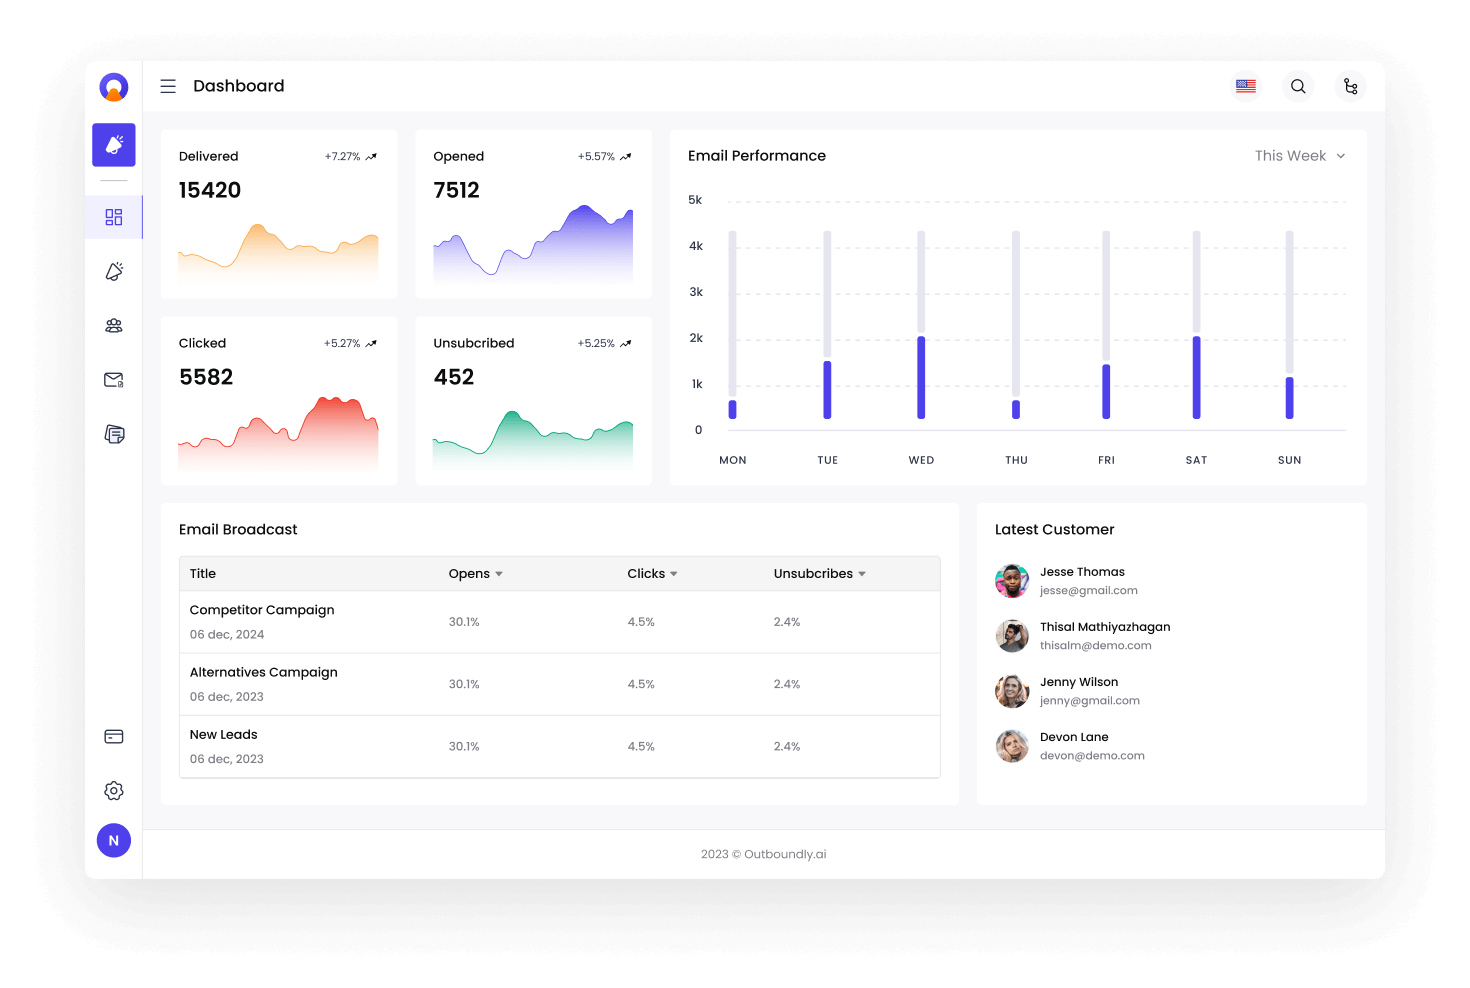 Outboundly-ai-dashboard-image